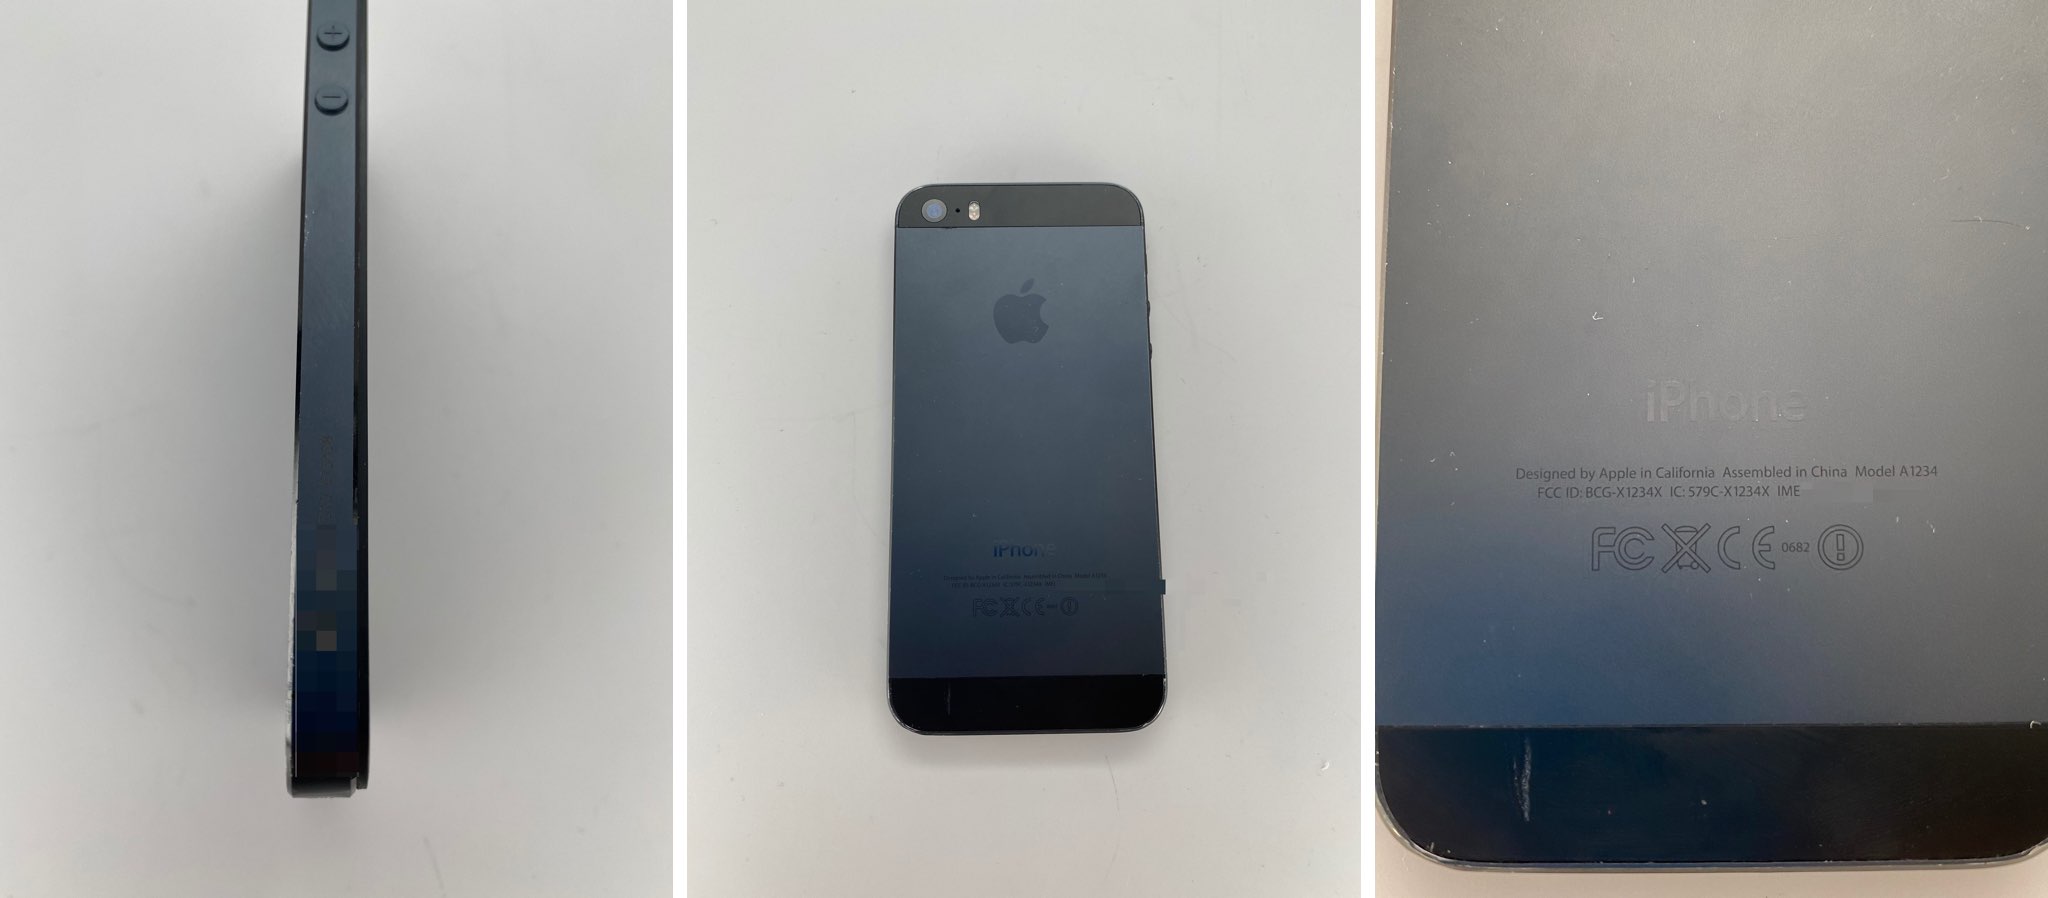 Photographs of an iPhone 5s prototype in an unreleased Black and Slate color, concealed in a stealth case